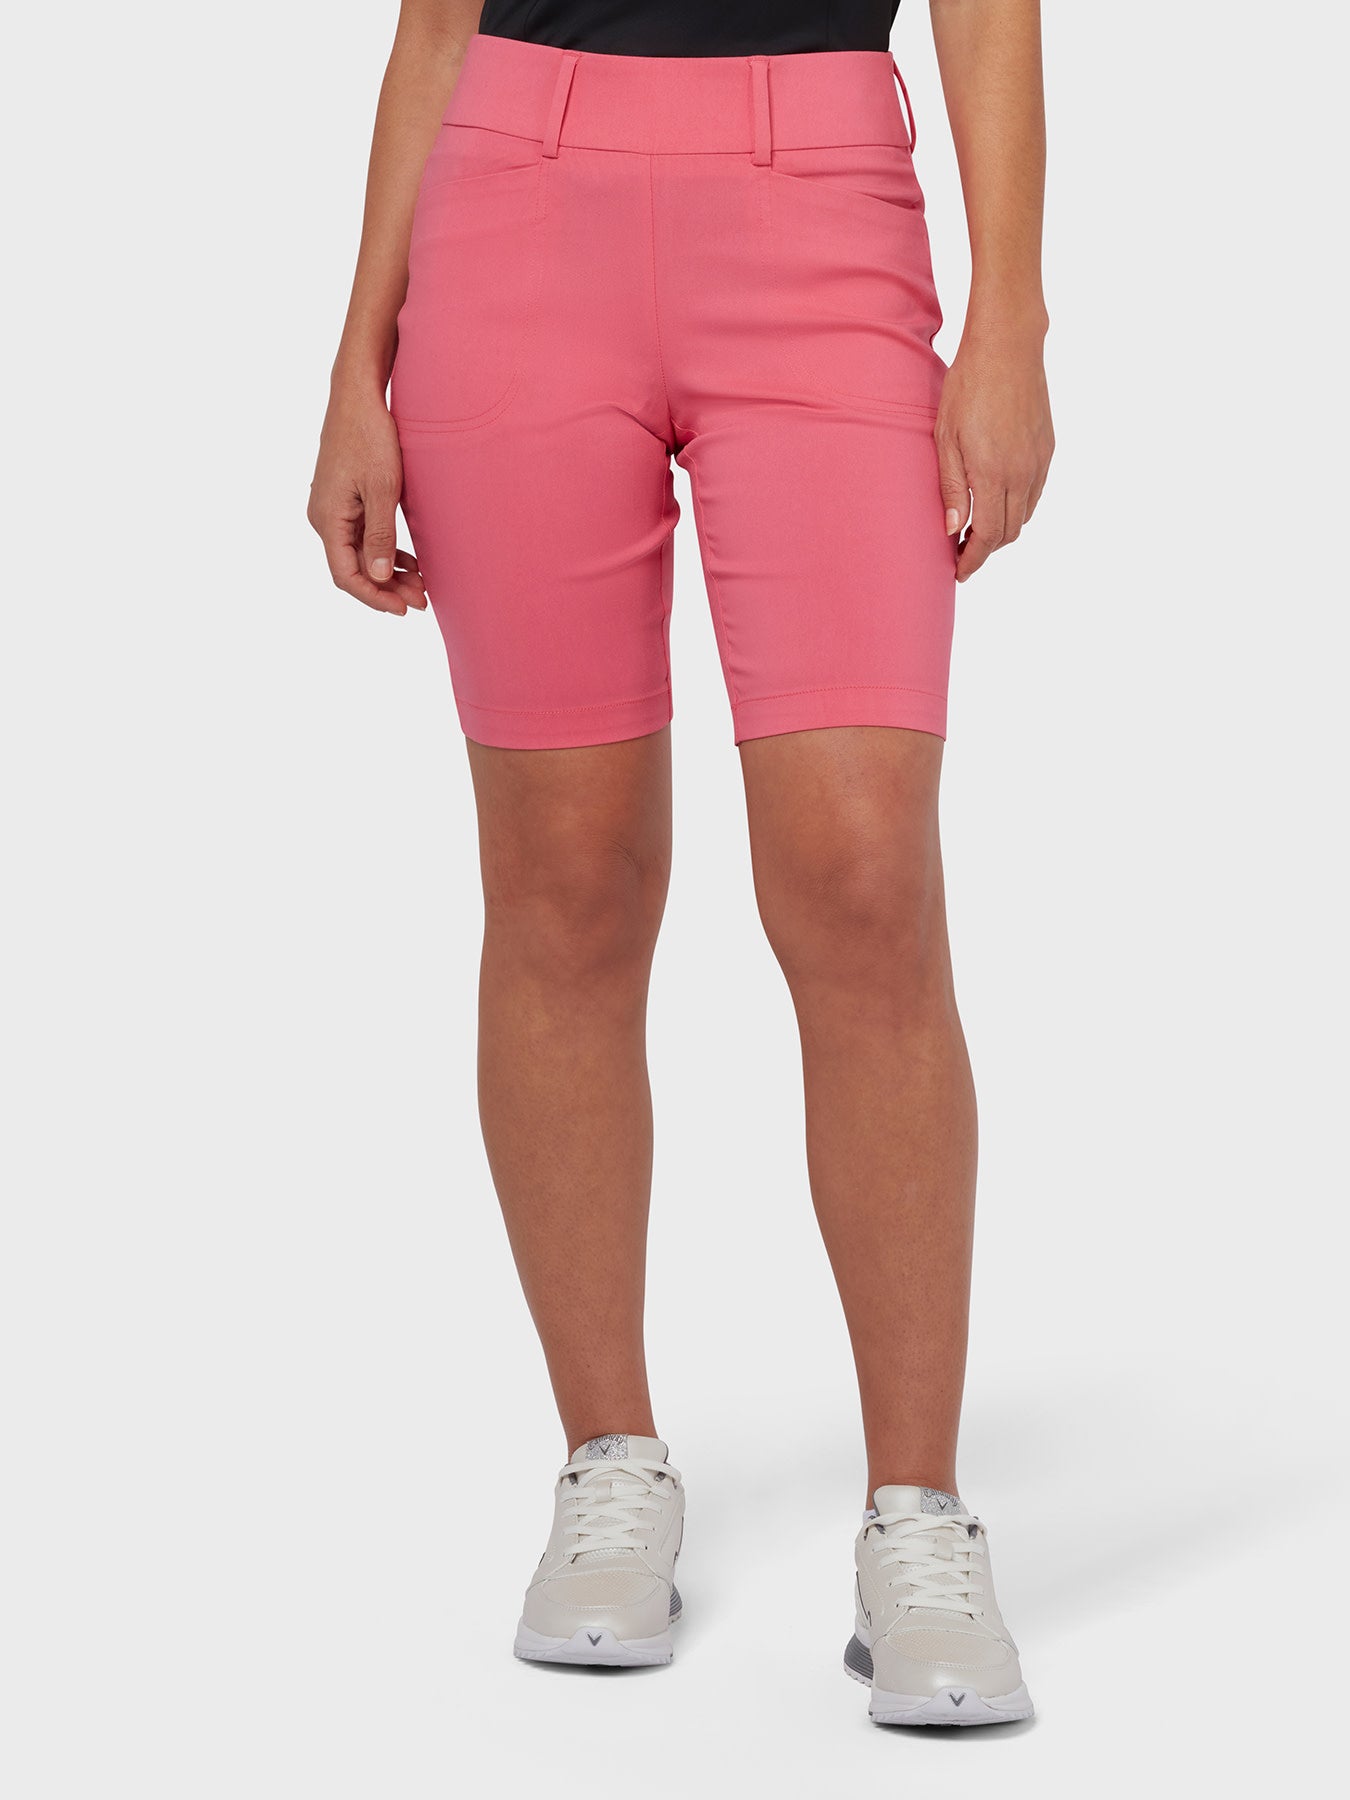 View Truesculpt Stretch Womens Shorts In Fruit Dove Fruit Dove S information